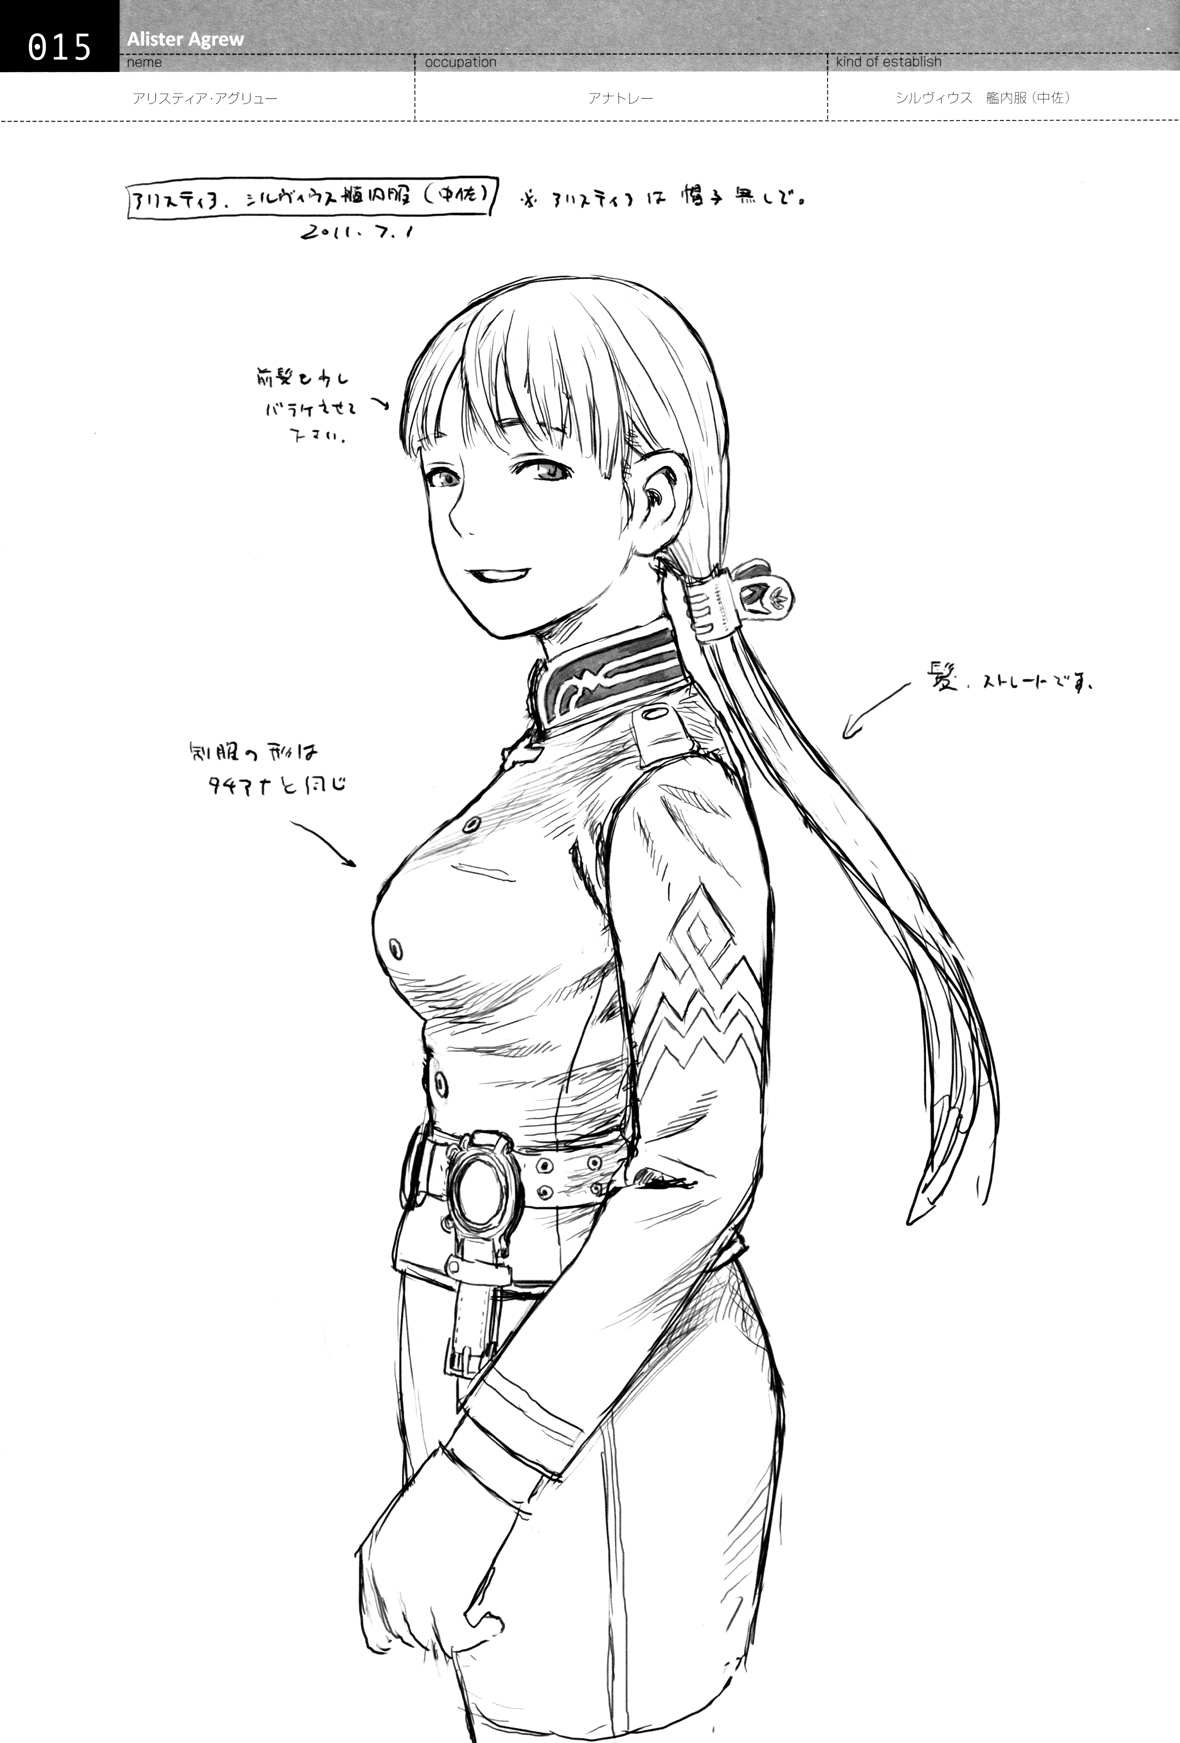 [Pasta's Estab (Range Murata)] Linkage - Last Exile ~ Fam, The Silver Wing - Character Filegraphy 02 12